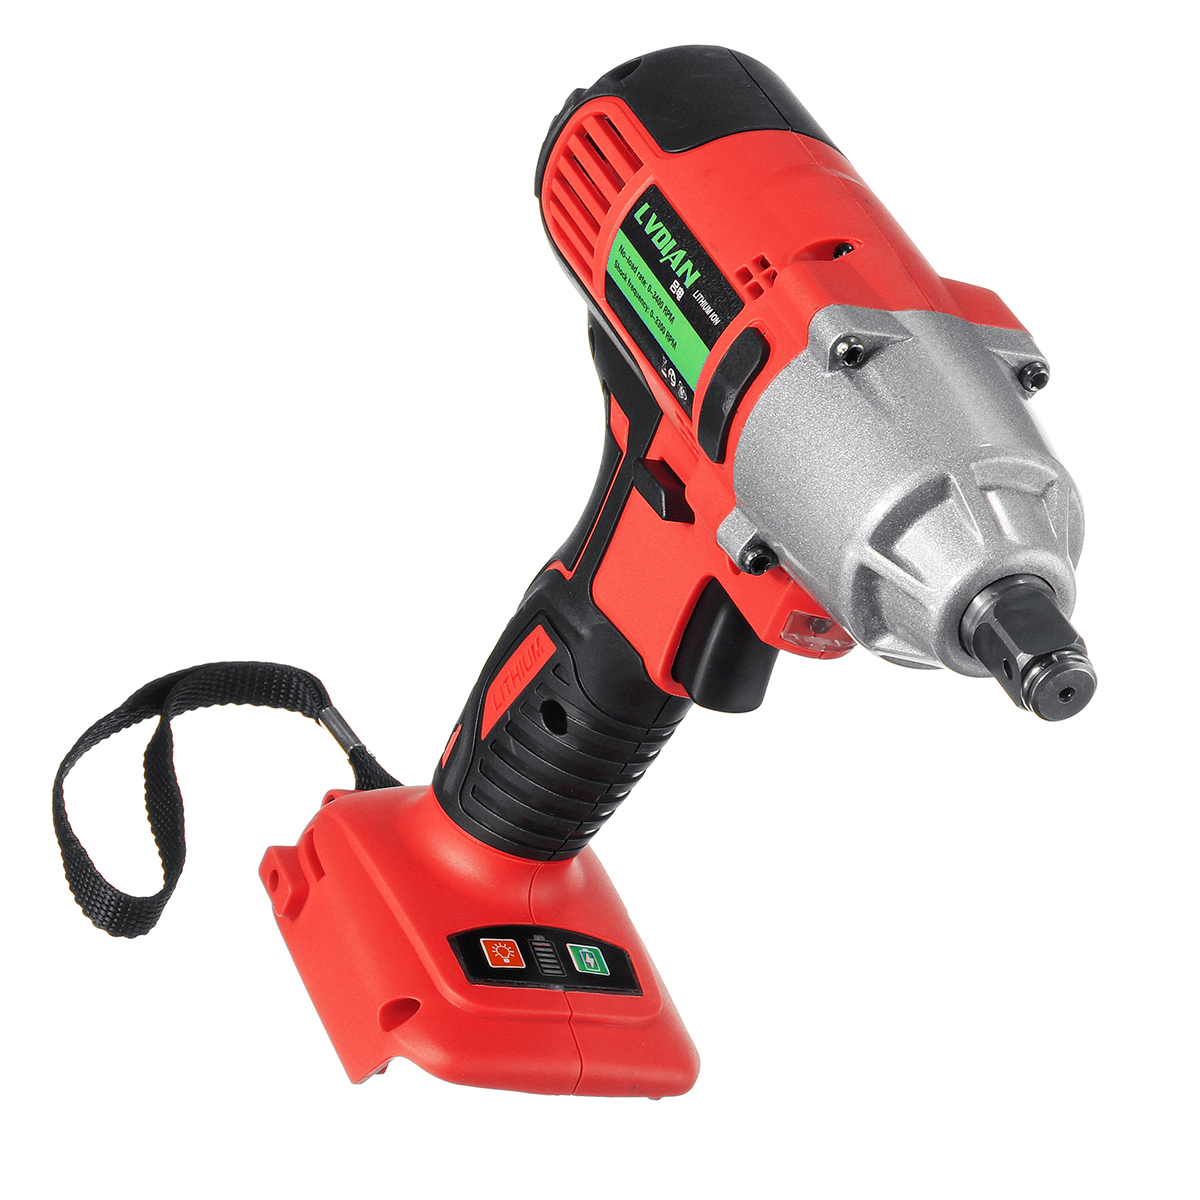 18V-320NM-Cordless-Electric-Wrench-Driver-Stepless-Speed-Change-Switch-for-Makita-Battery-Electric-W-1602070-9